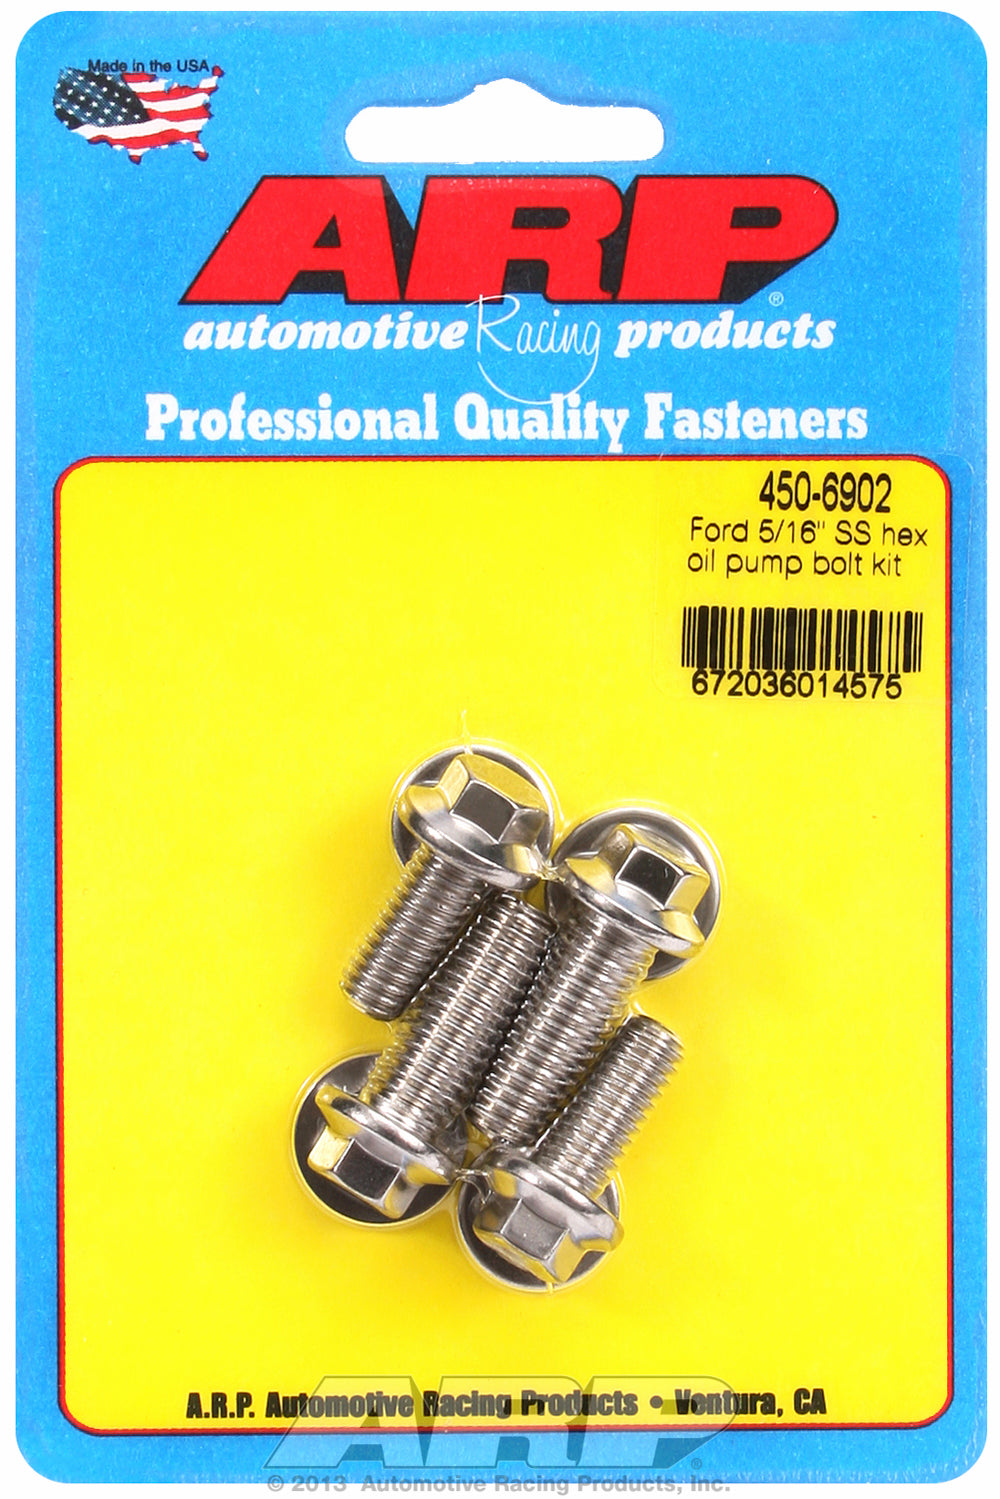 Oil Pump Bolt Kit for Ford 3/8˝ & 5/16˝ 4 piece bolt kit Stainless - Hex Head